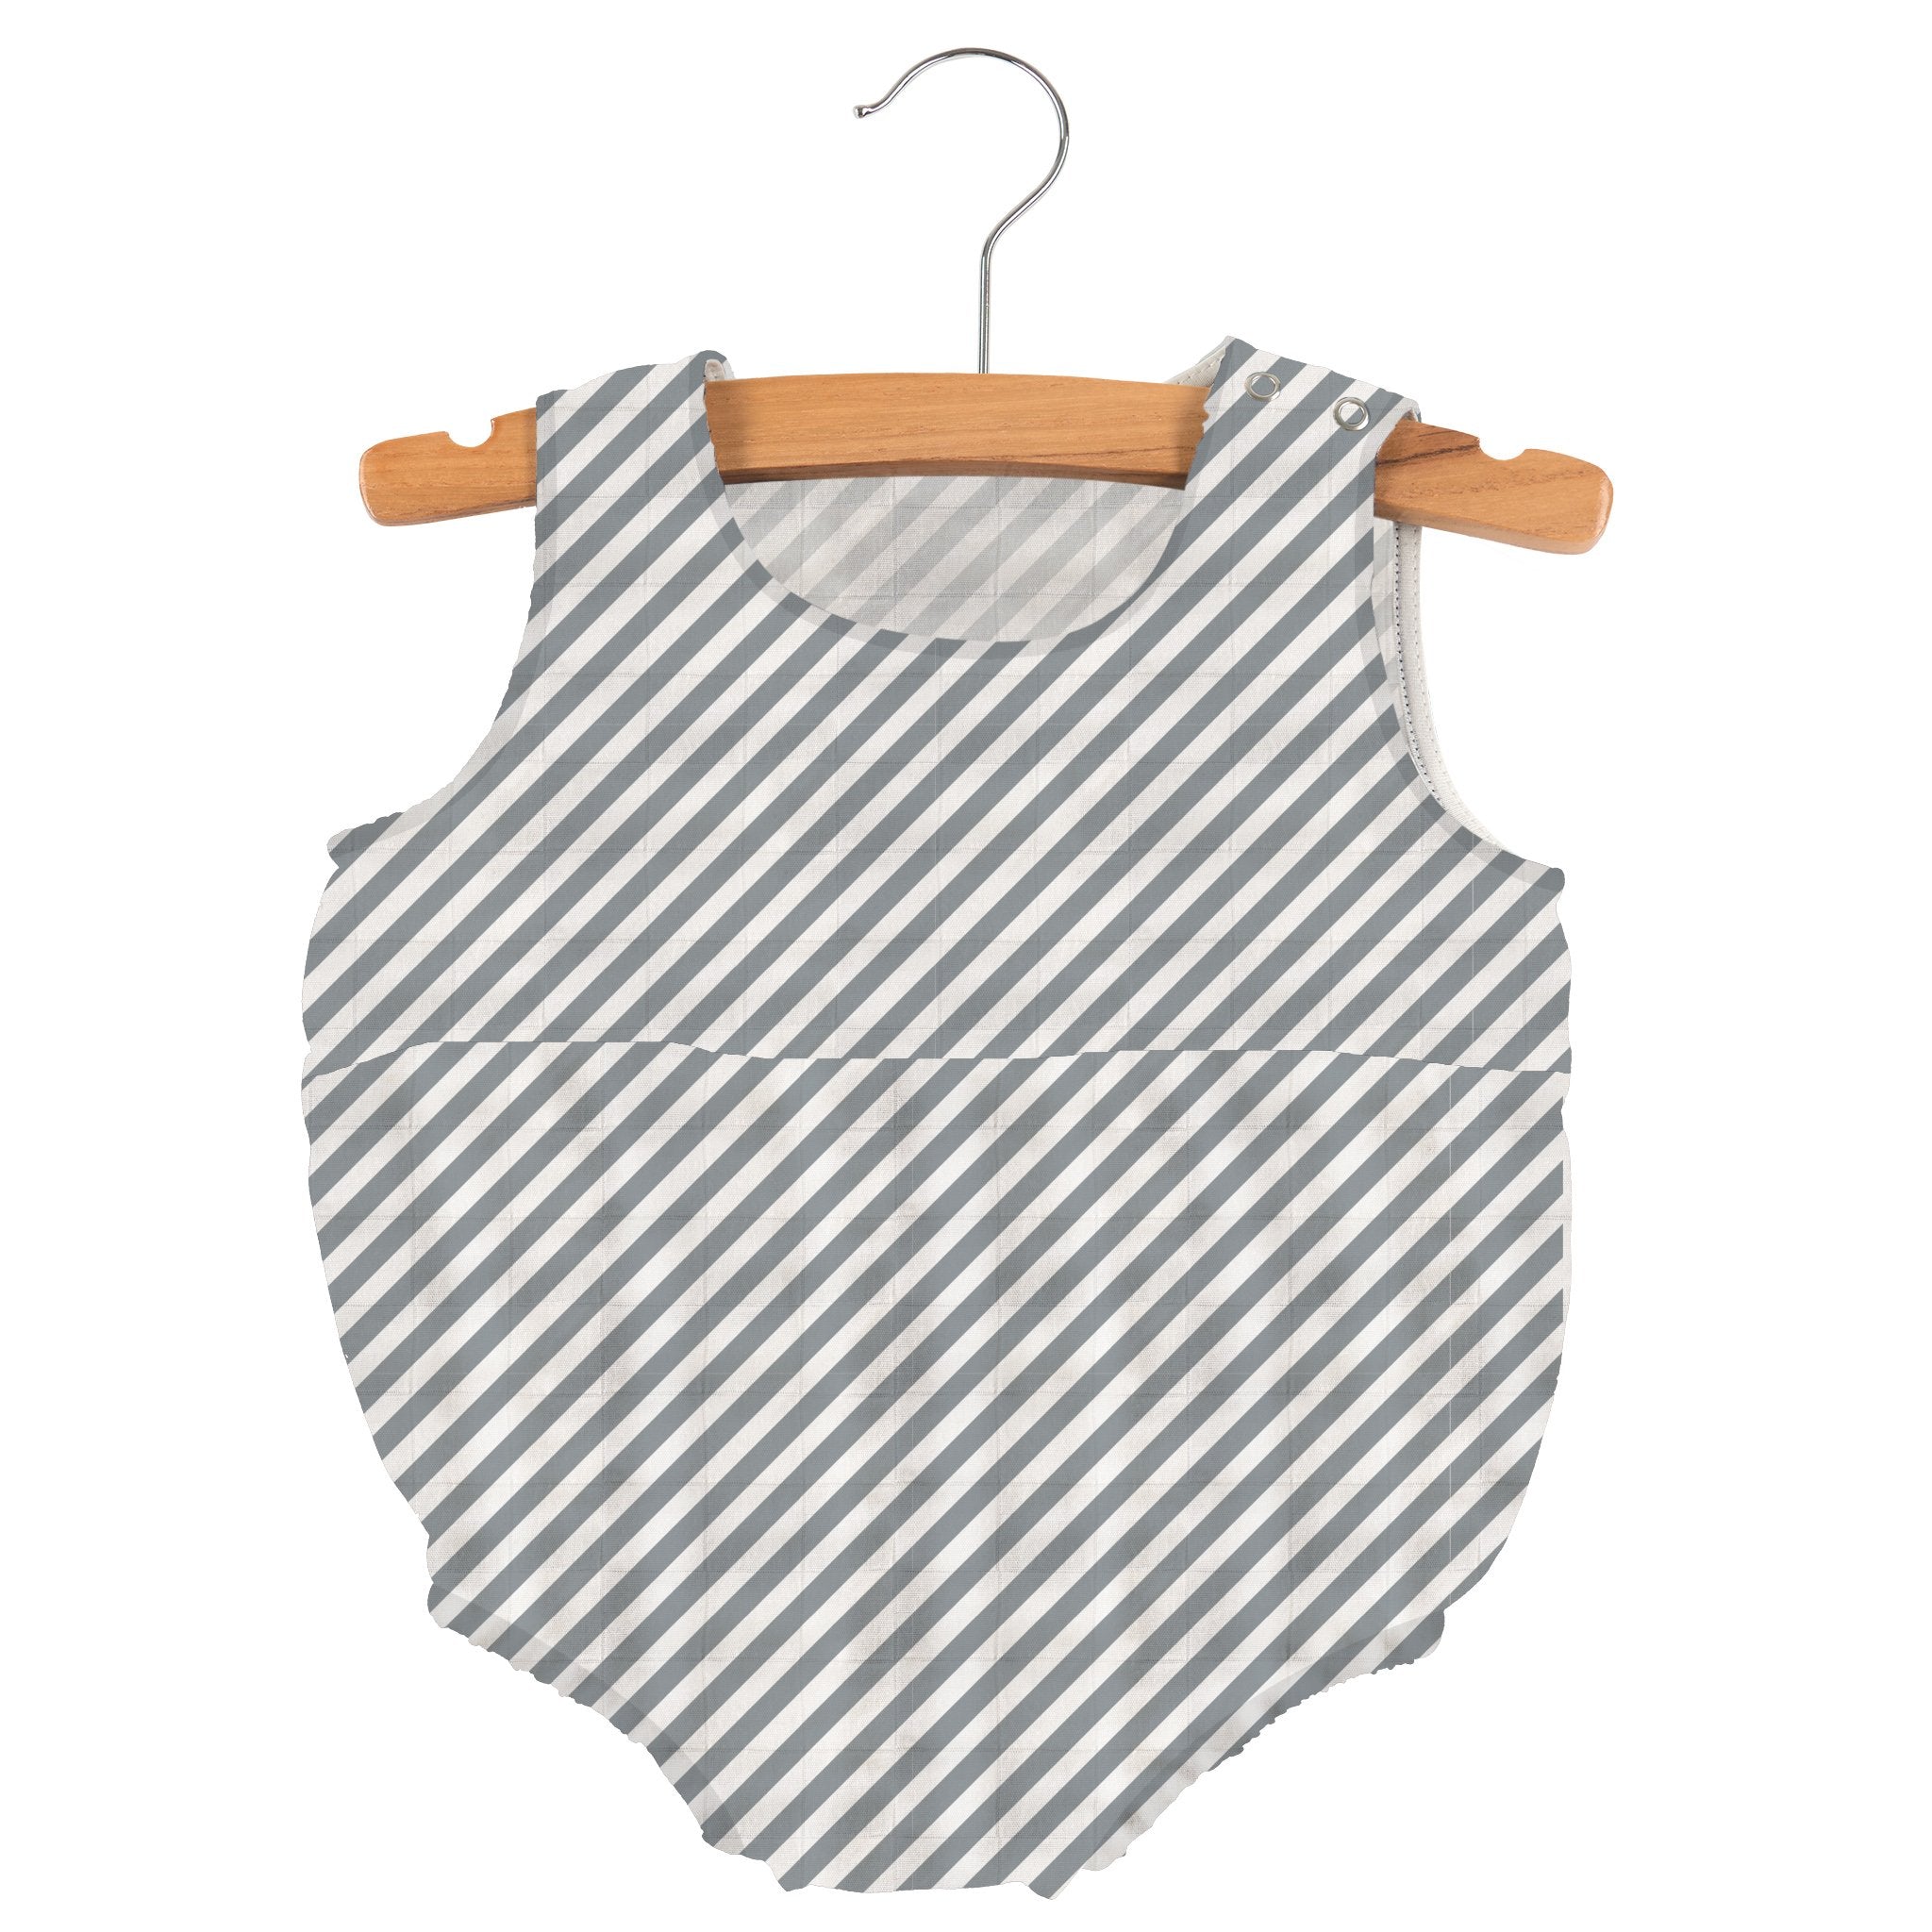 Baby one piece with stripes made out of bamboo